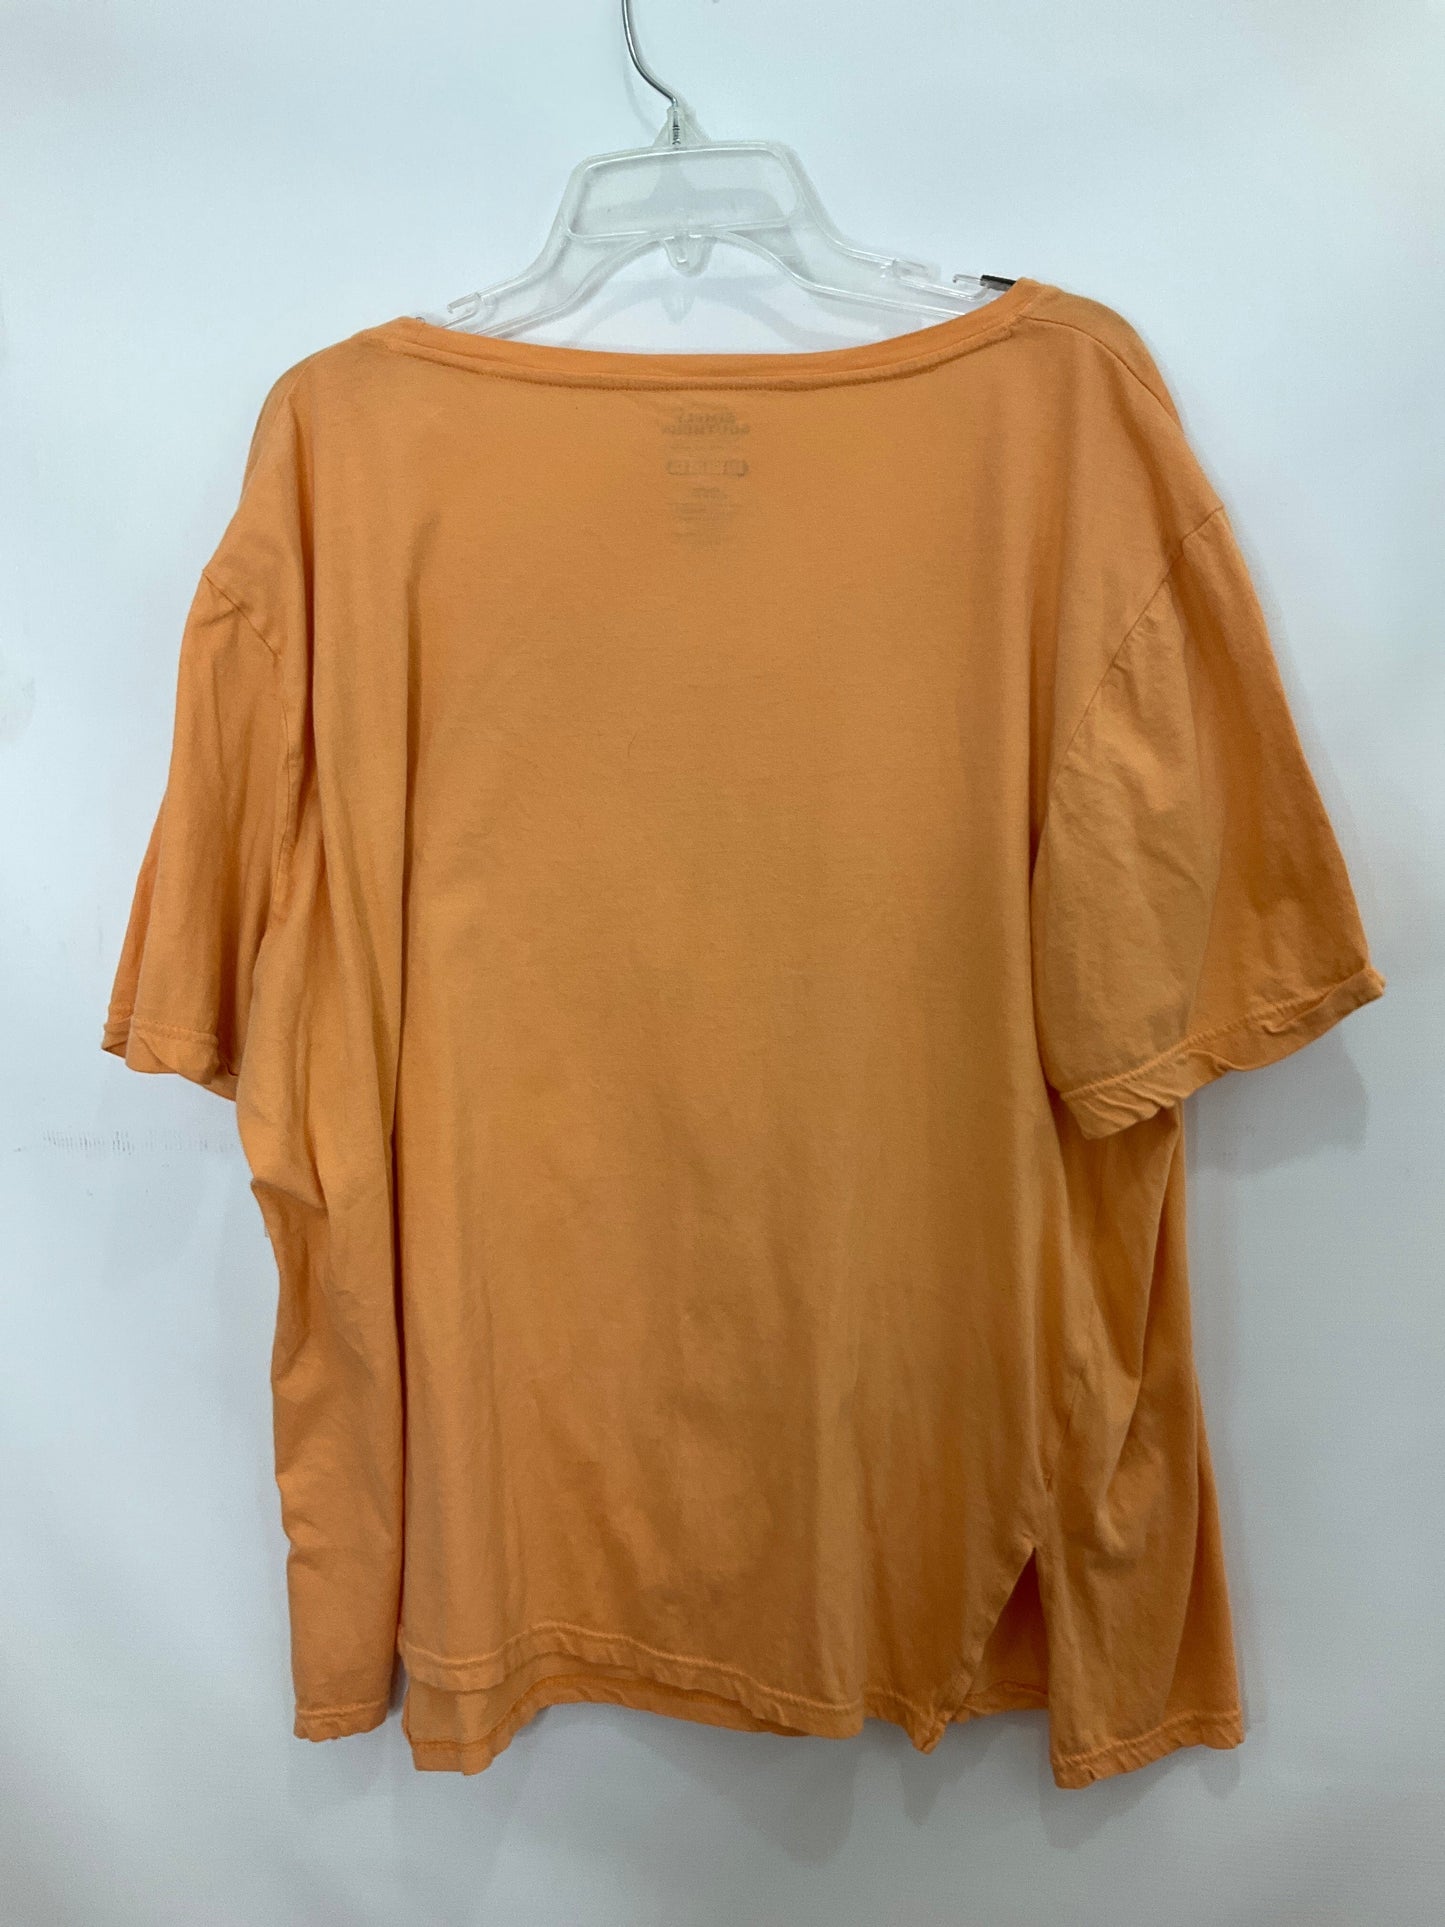 Orange Top Short Sleeve Simply Southern, Size 3x